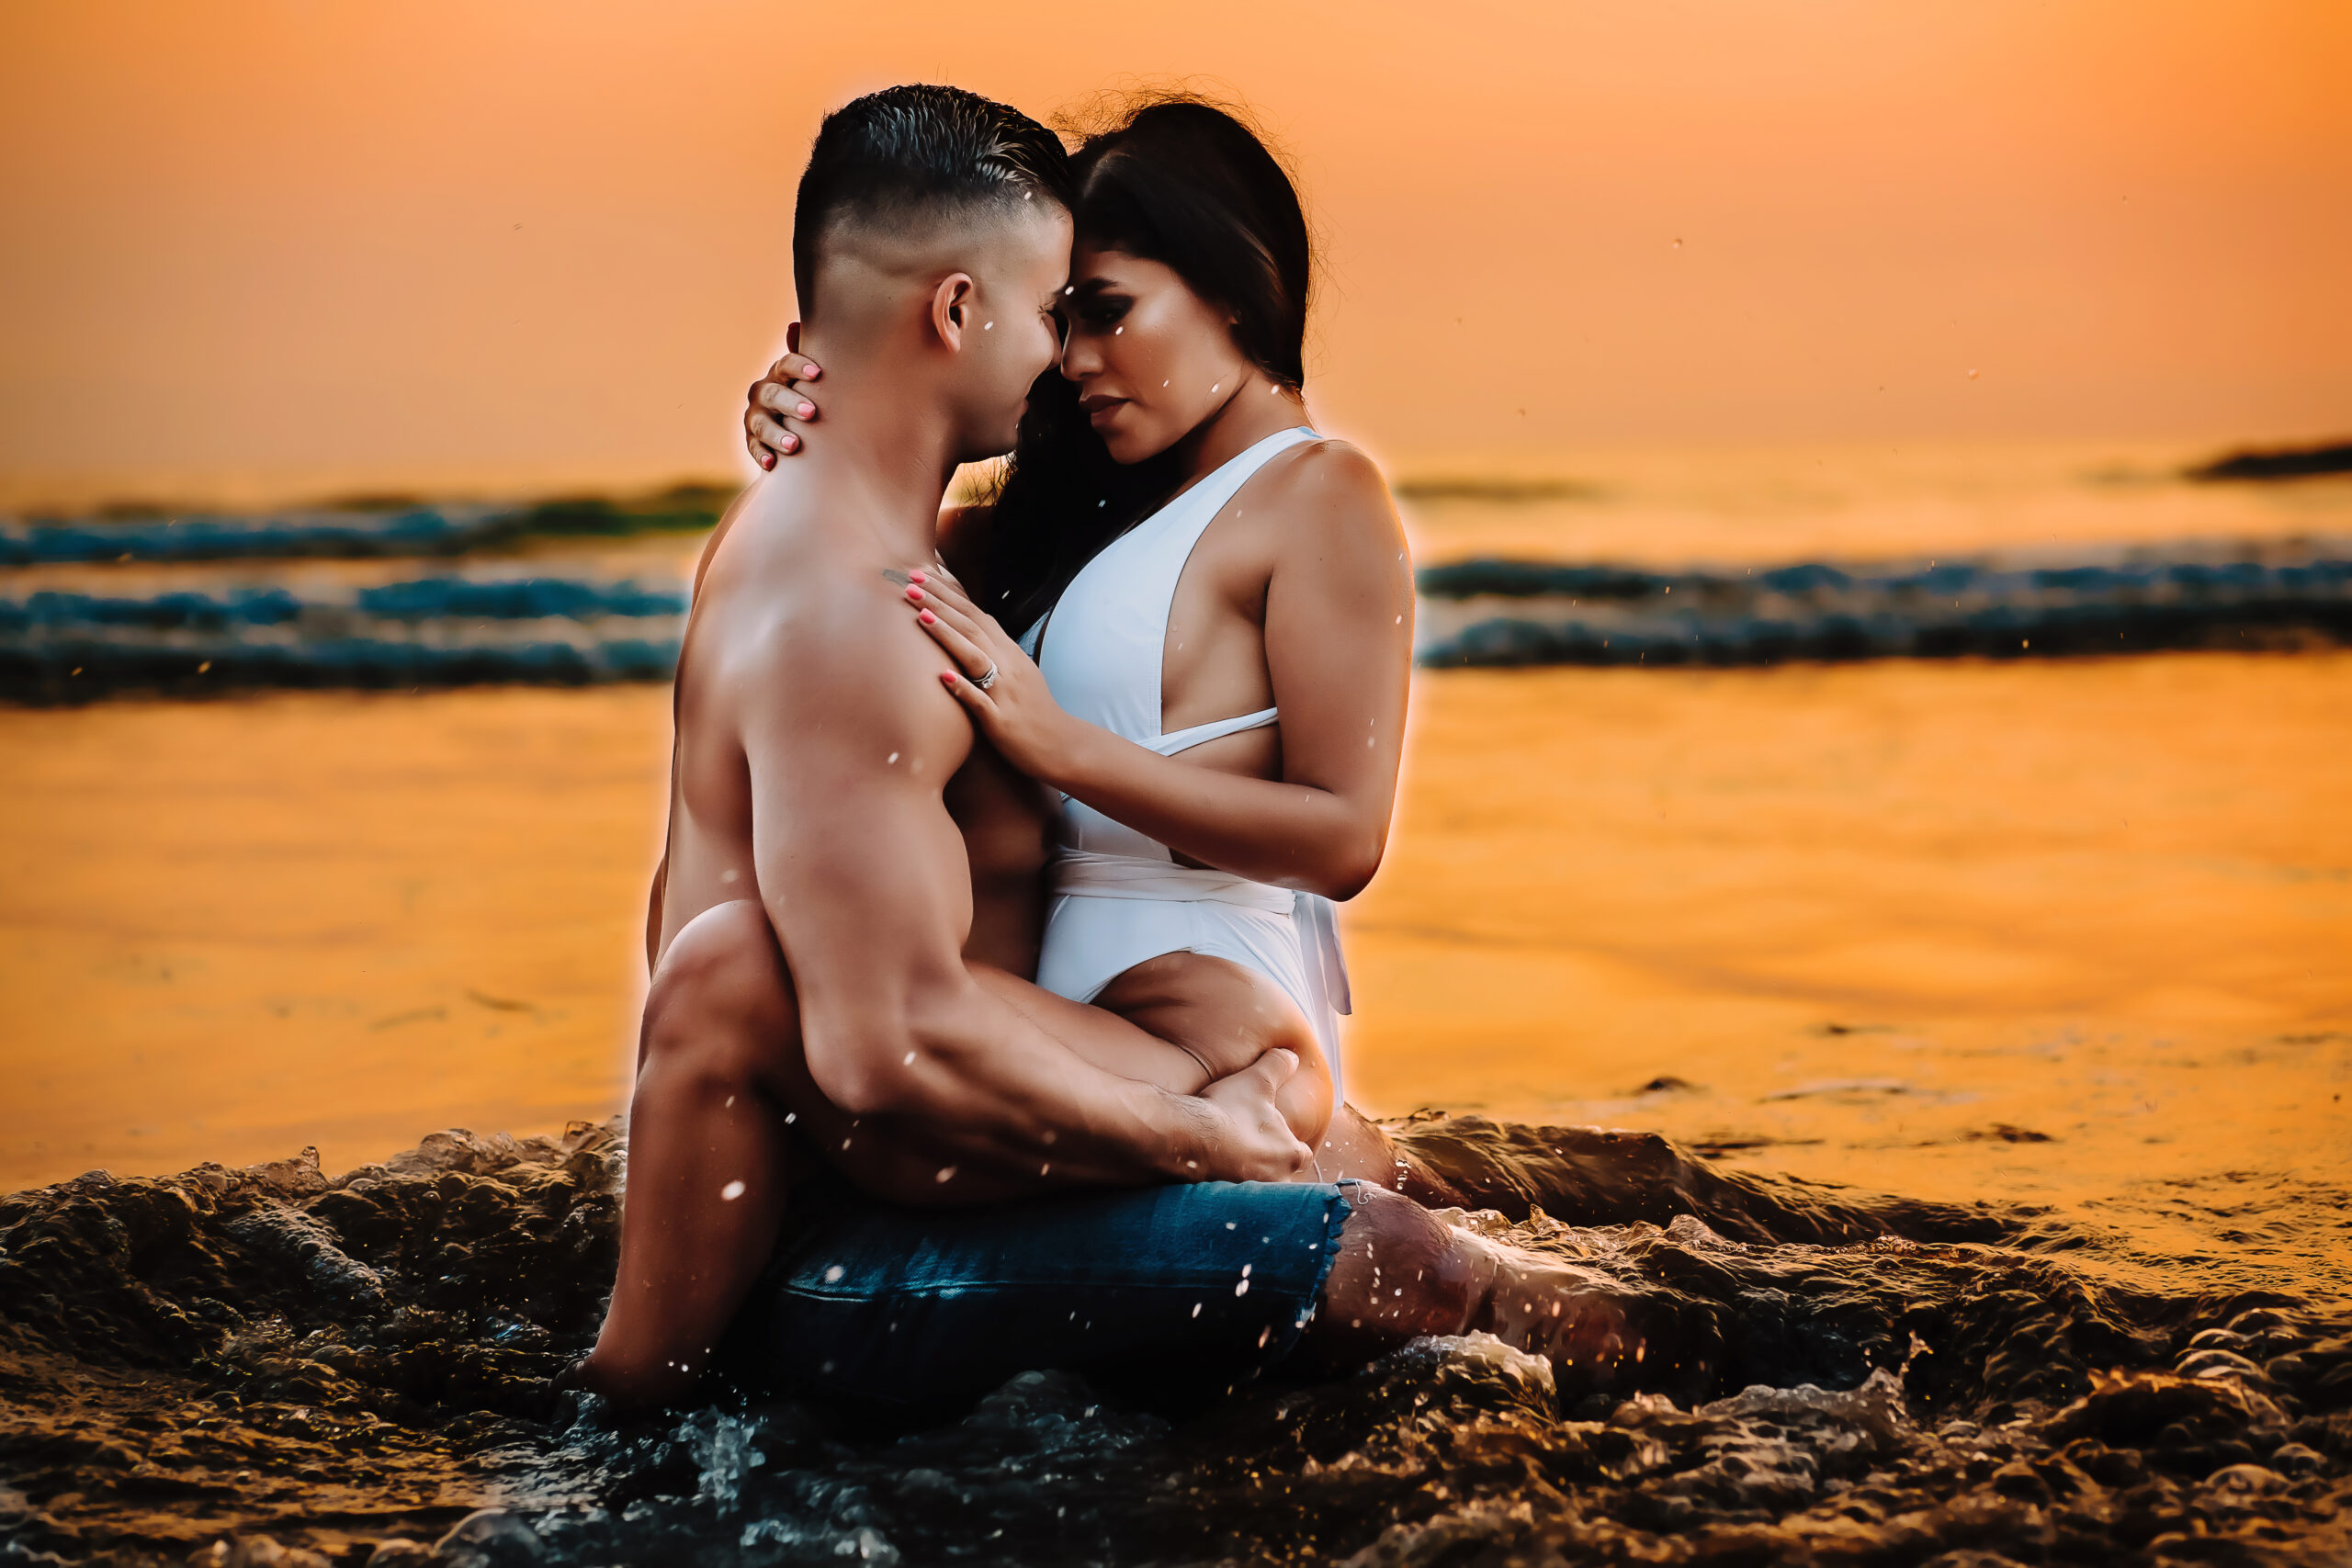 A man and woman embrace each other in the crashing waves, captured by St. Louis Boudoir Photographer Andrea Moore.